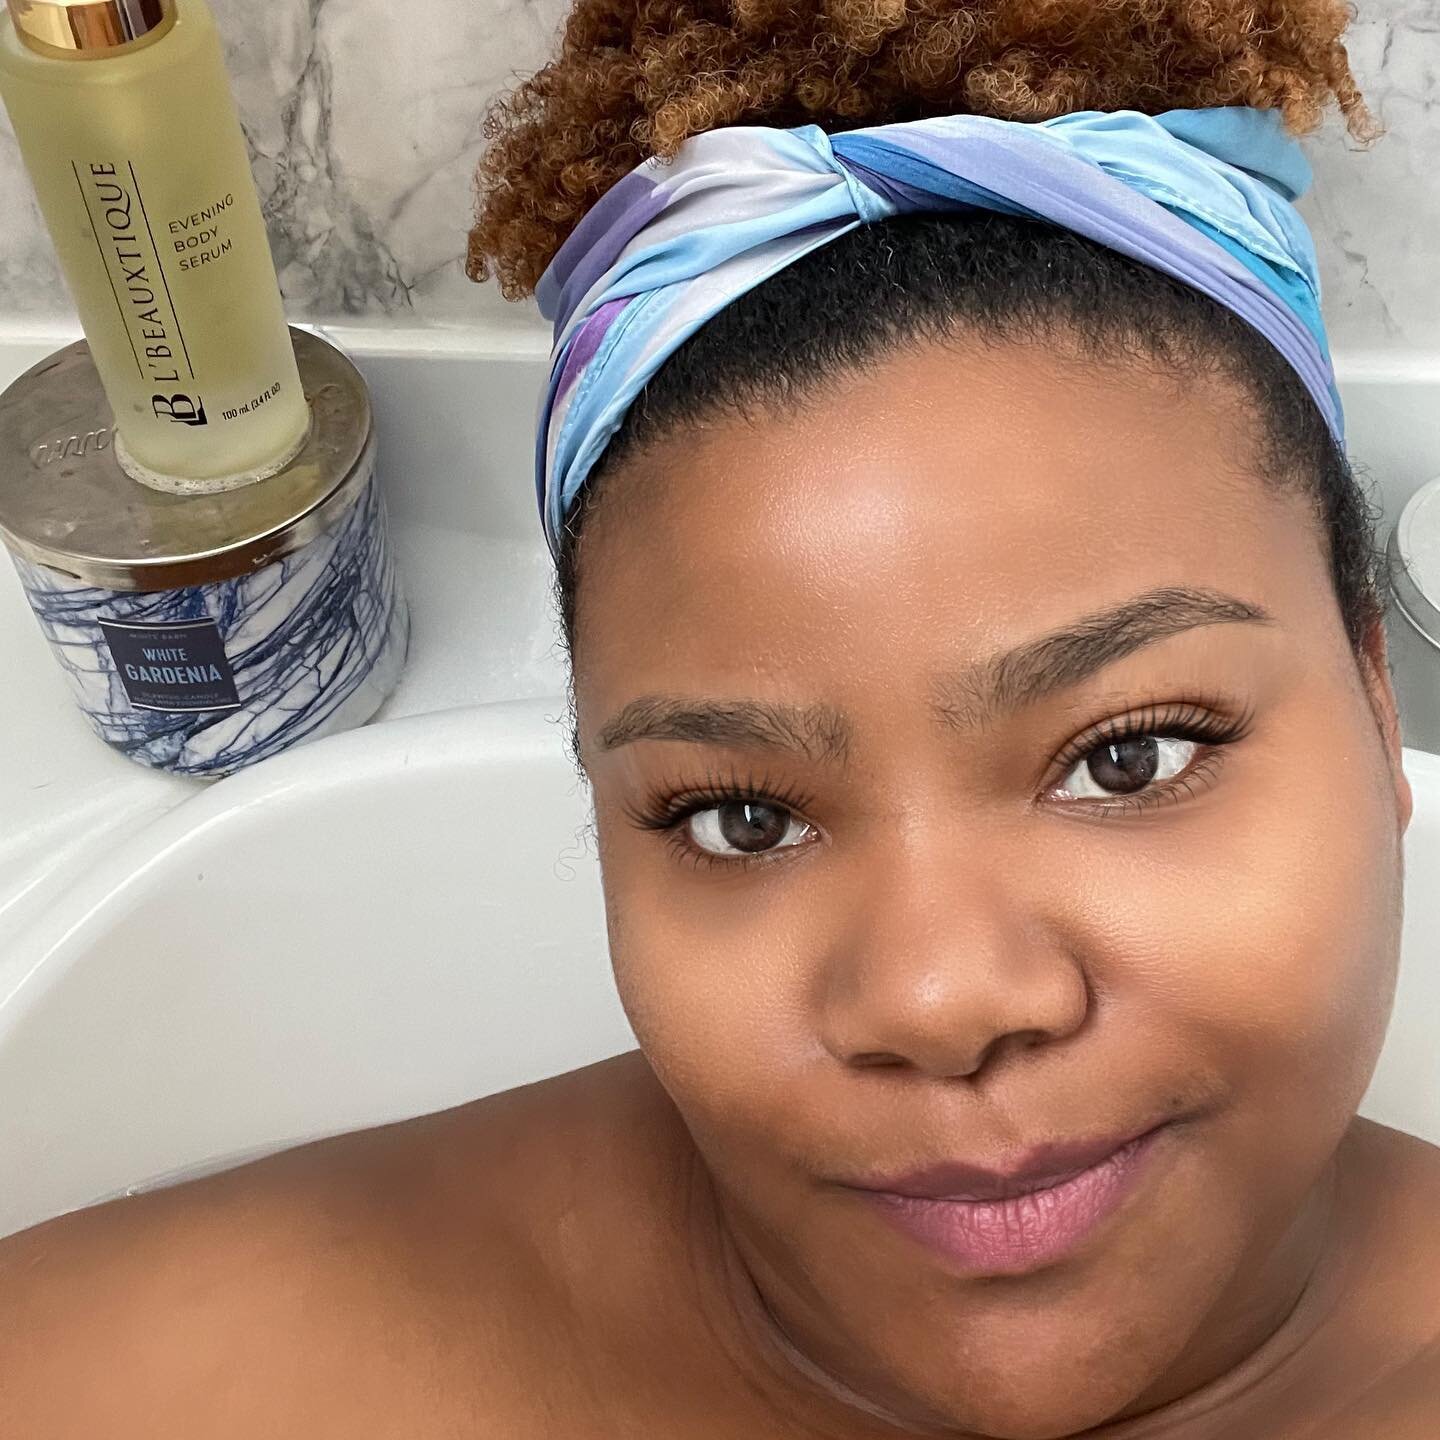 Taking a moment to unwind and indulge in some self-care with @lbeauxtique's Evening Body Serum 💆🏾&zwj;♀️🧖🏾&zwj;♀️The calming aroma and nourishing ingredients have been a game-changer for my relaxation routine. Whether you're feeling stressed afte